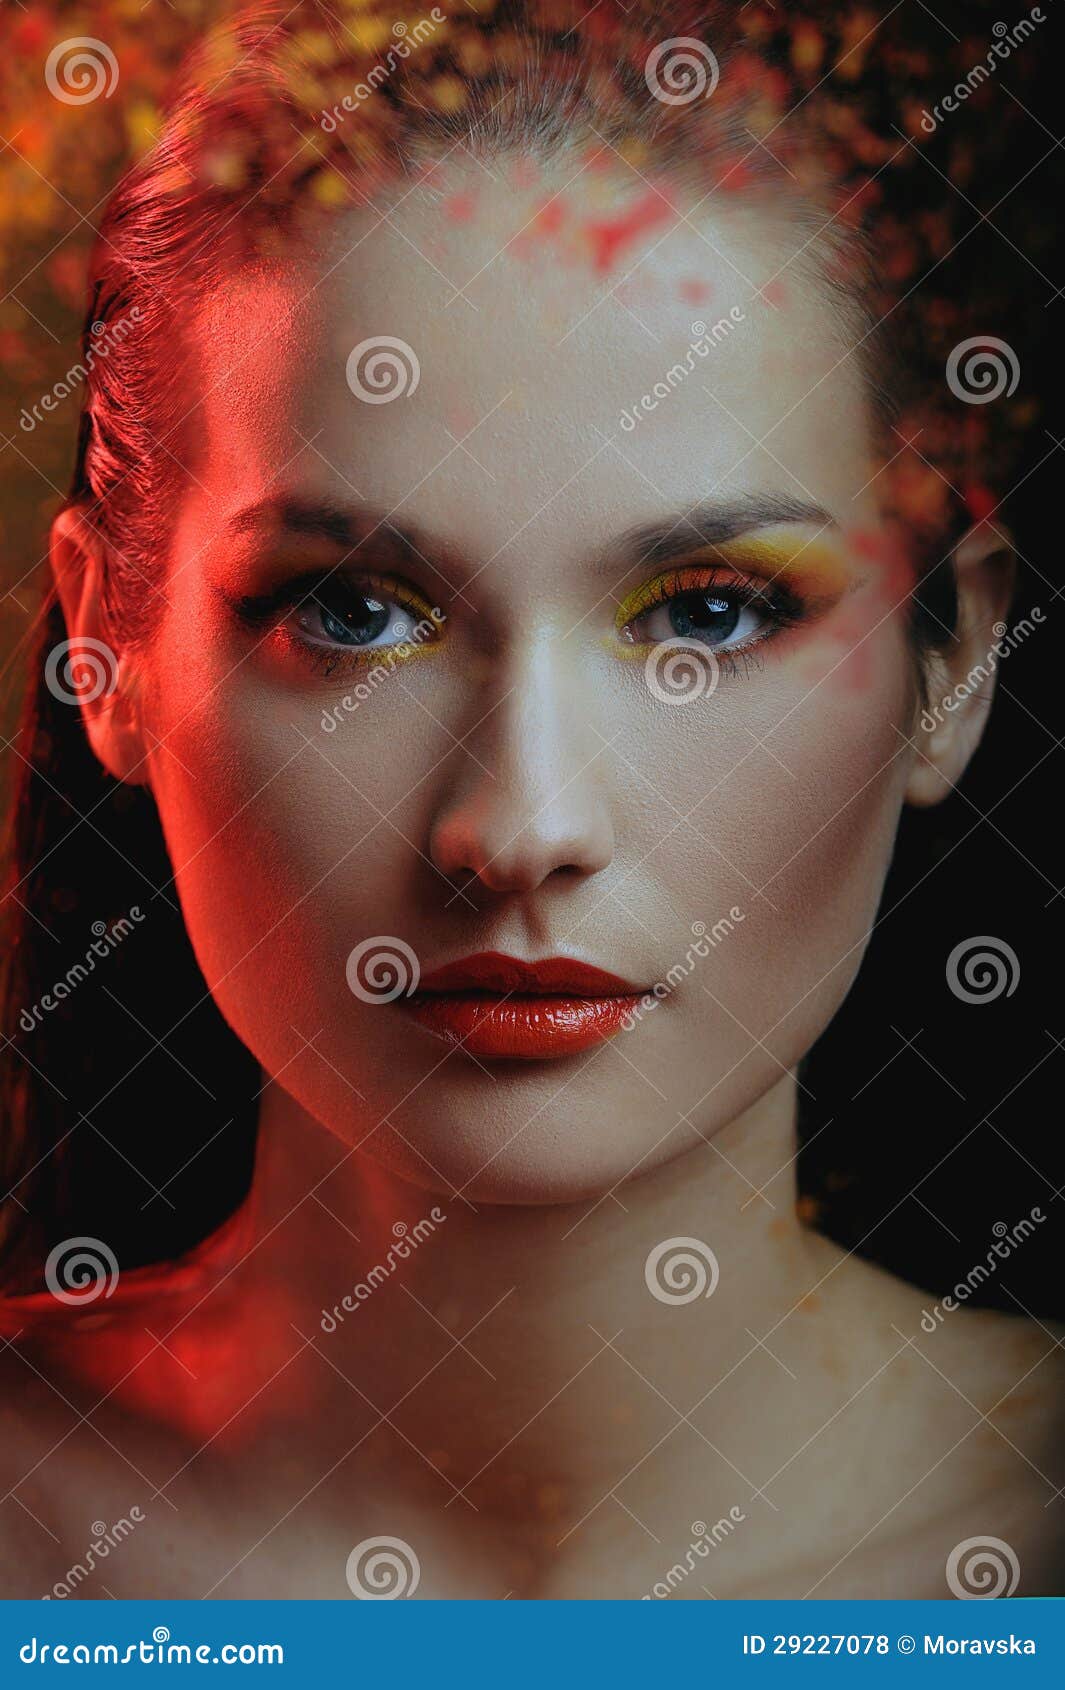 beautiful girl in color paint splash behind the painted color glass in red light